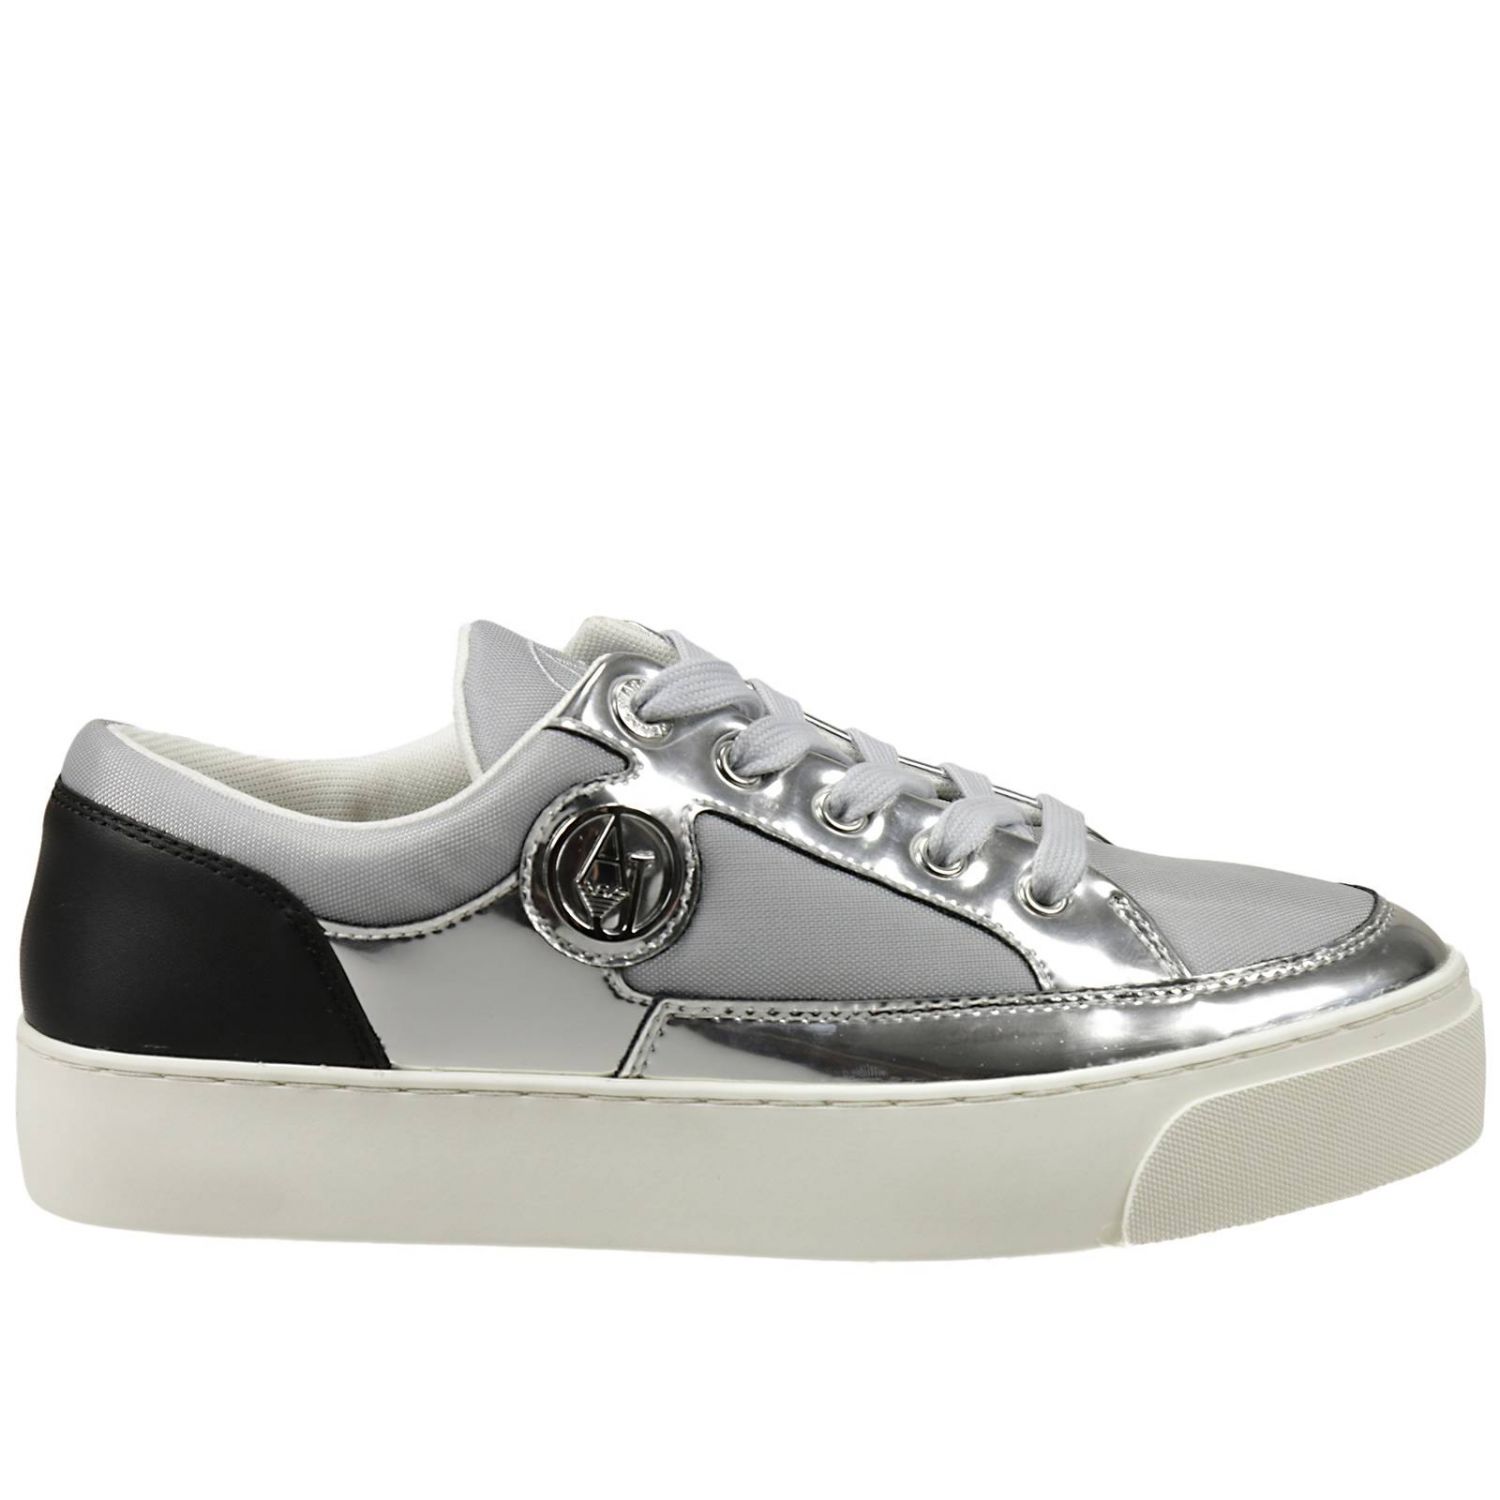 armani jeans sneakers womens